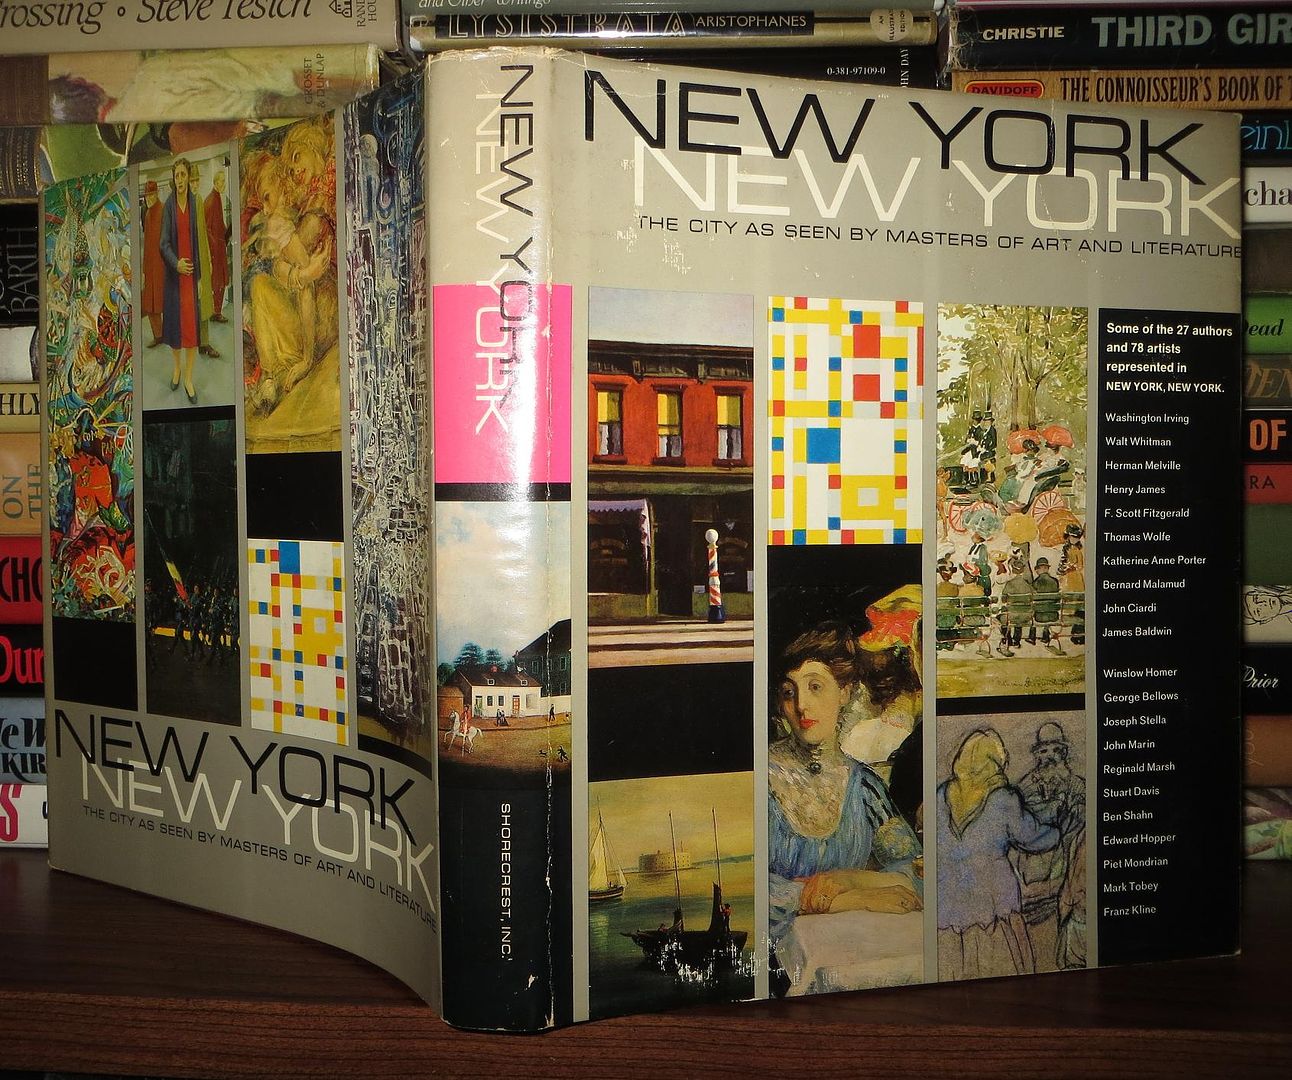 GORDON, JOHN AND HILL, L. RUST (ED) - New York New York the City As Seen by Masters of Art and Literature